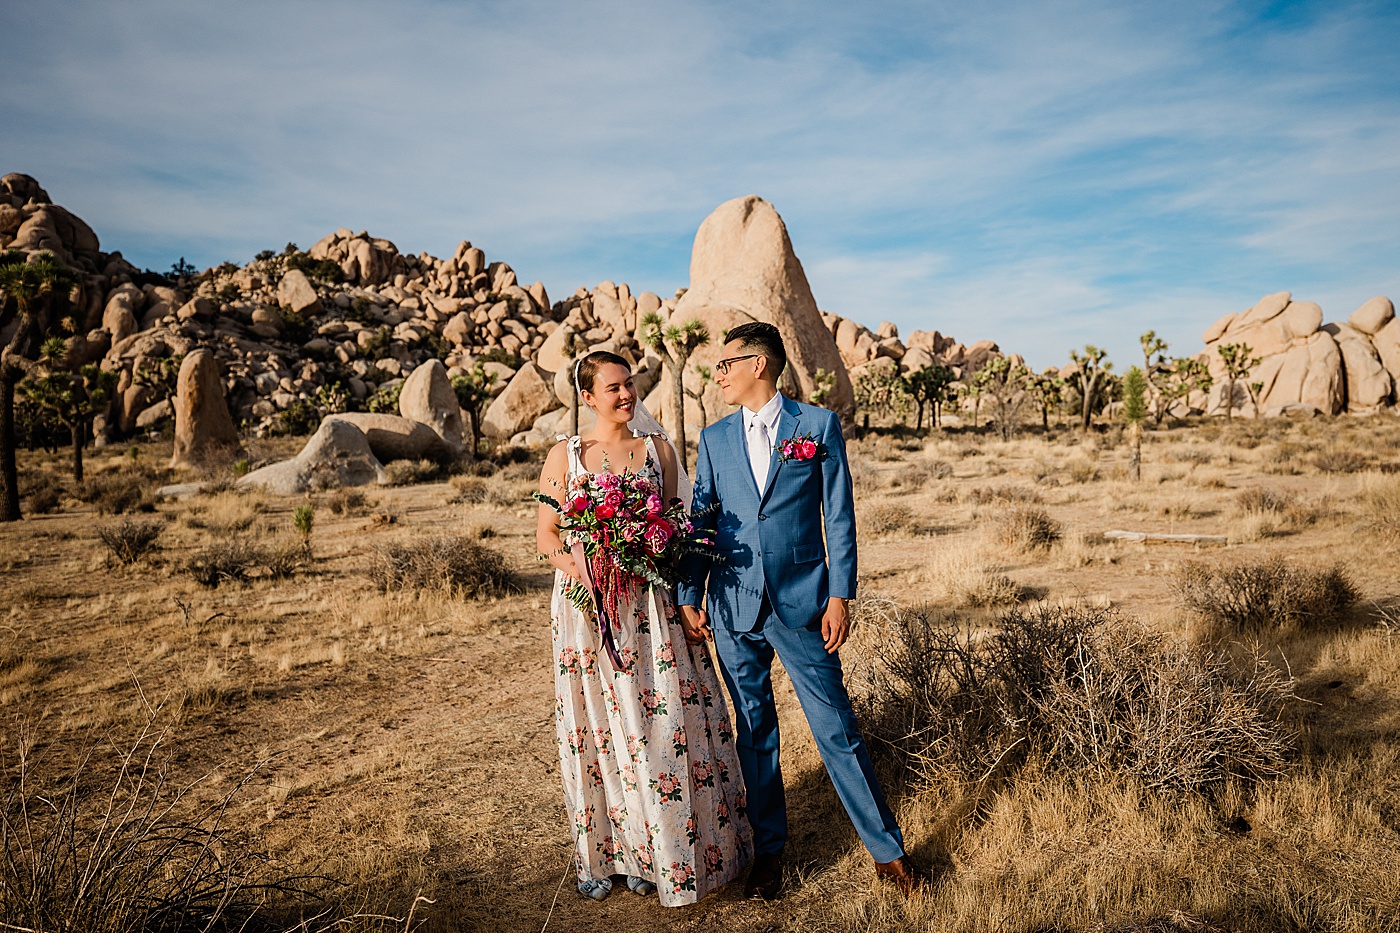 Joshua Tree elopement. A groom in a blue suit, and bride in a floral wedding dress hold hands laughing together in front of a rock formation.